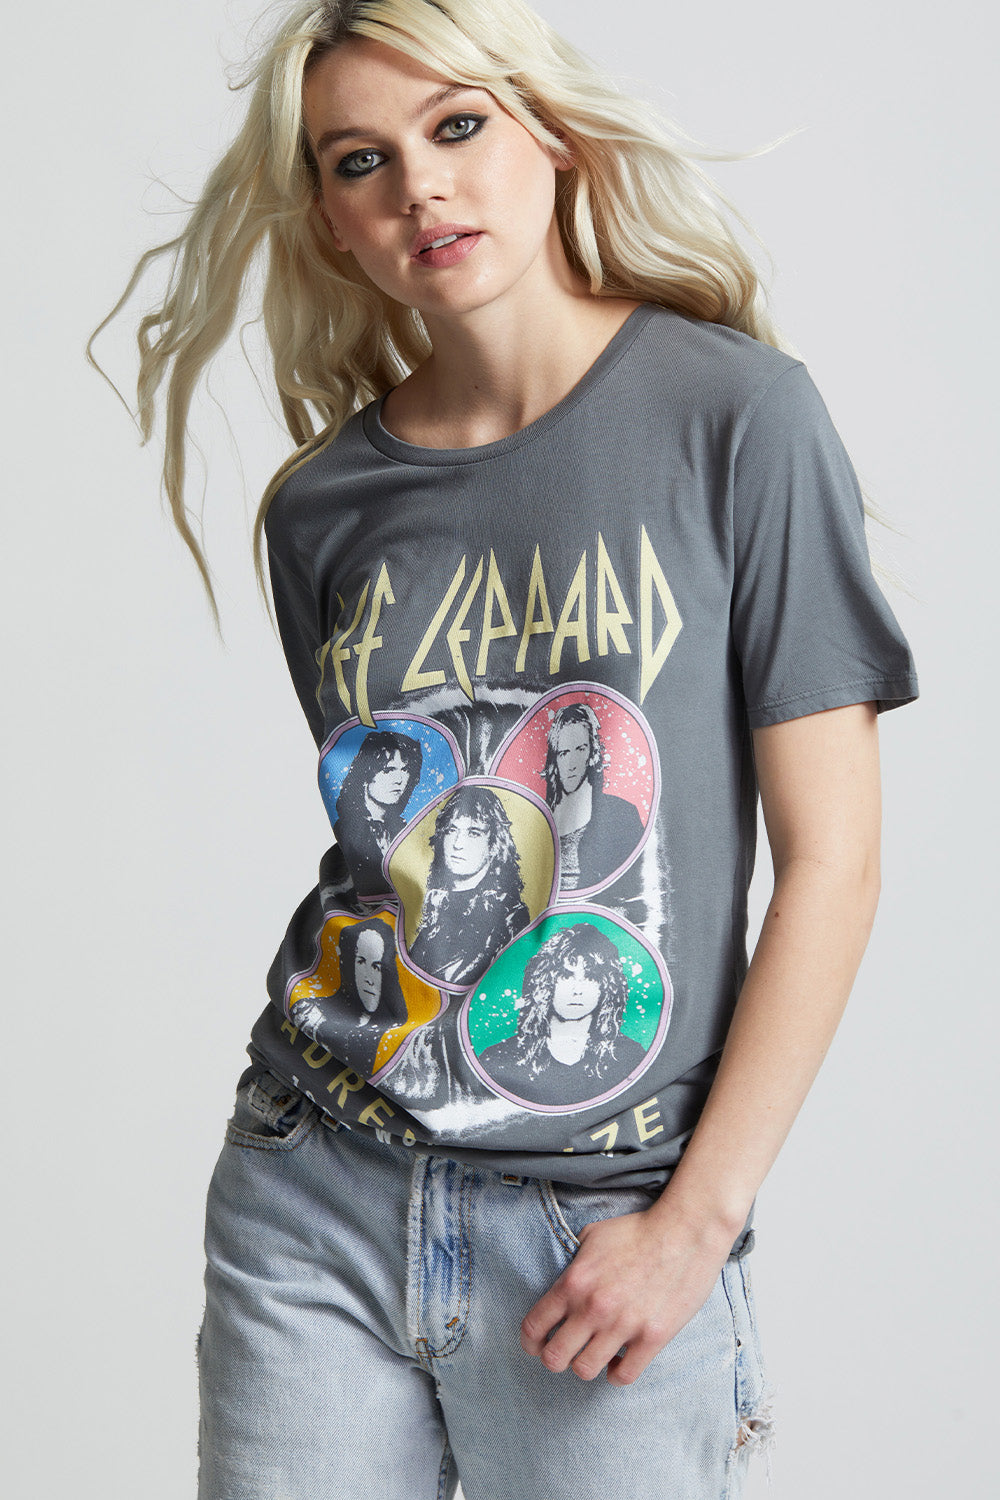 Def Leppard Adrenalize 1992 Tee